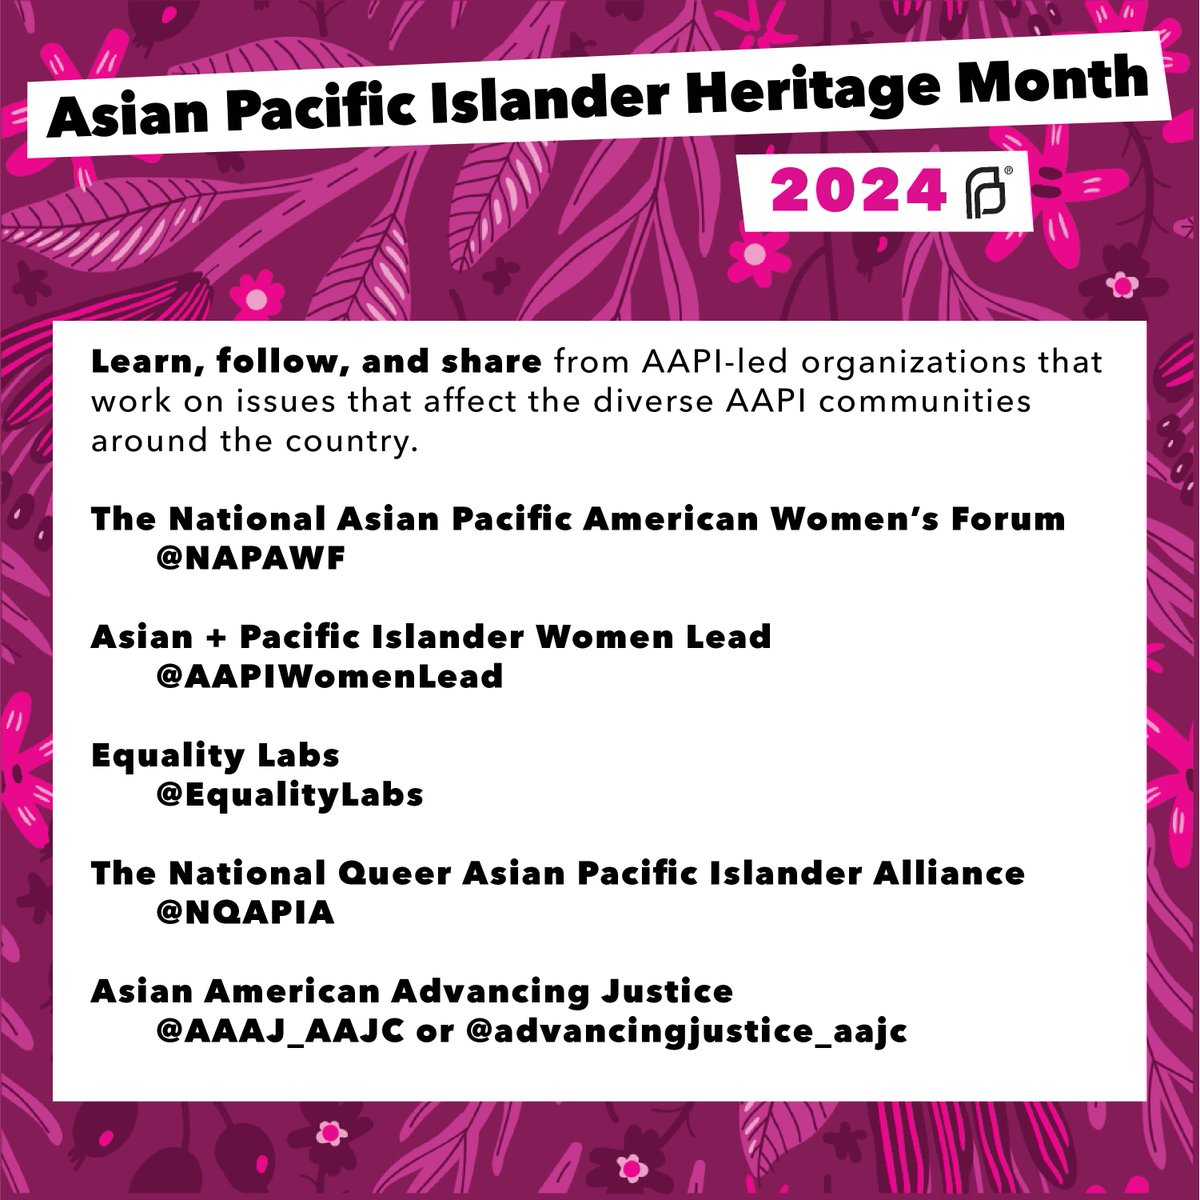 This #AsianPacificIslanderHeritageMonth, we’re highlighting a few of the AAPI-led organizations that work on issues that affect the AAPI communities around the country and celebrate the wins that keep moving us all forward.